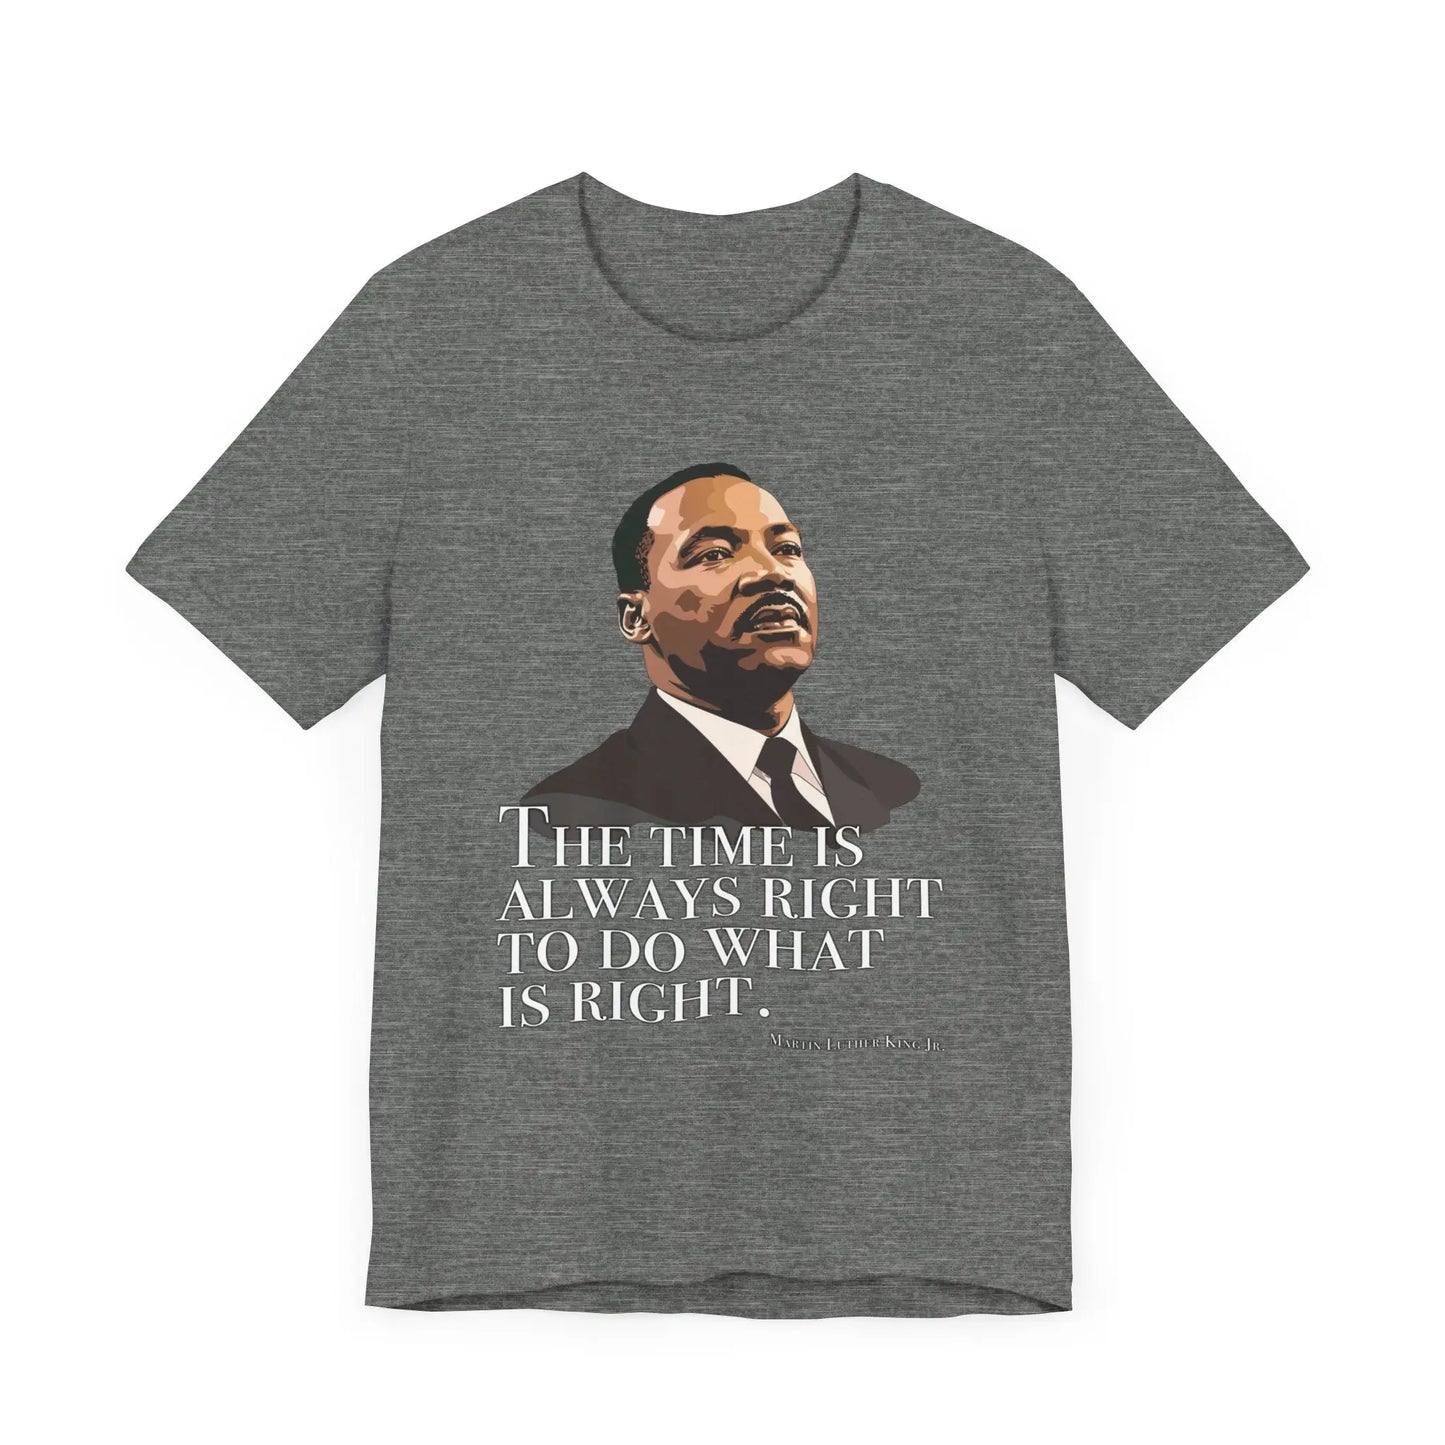 The Time Is Always Right Men's Tee - Wicked Tees